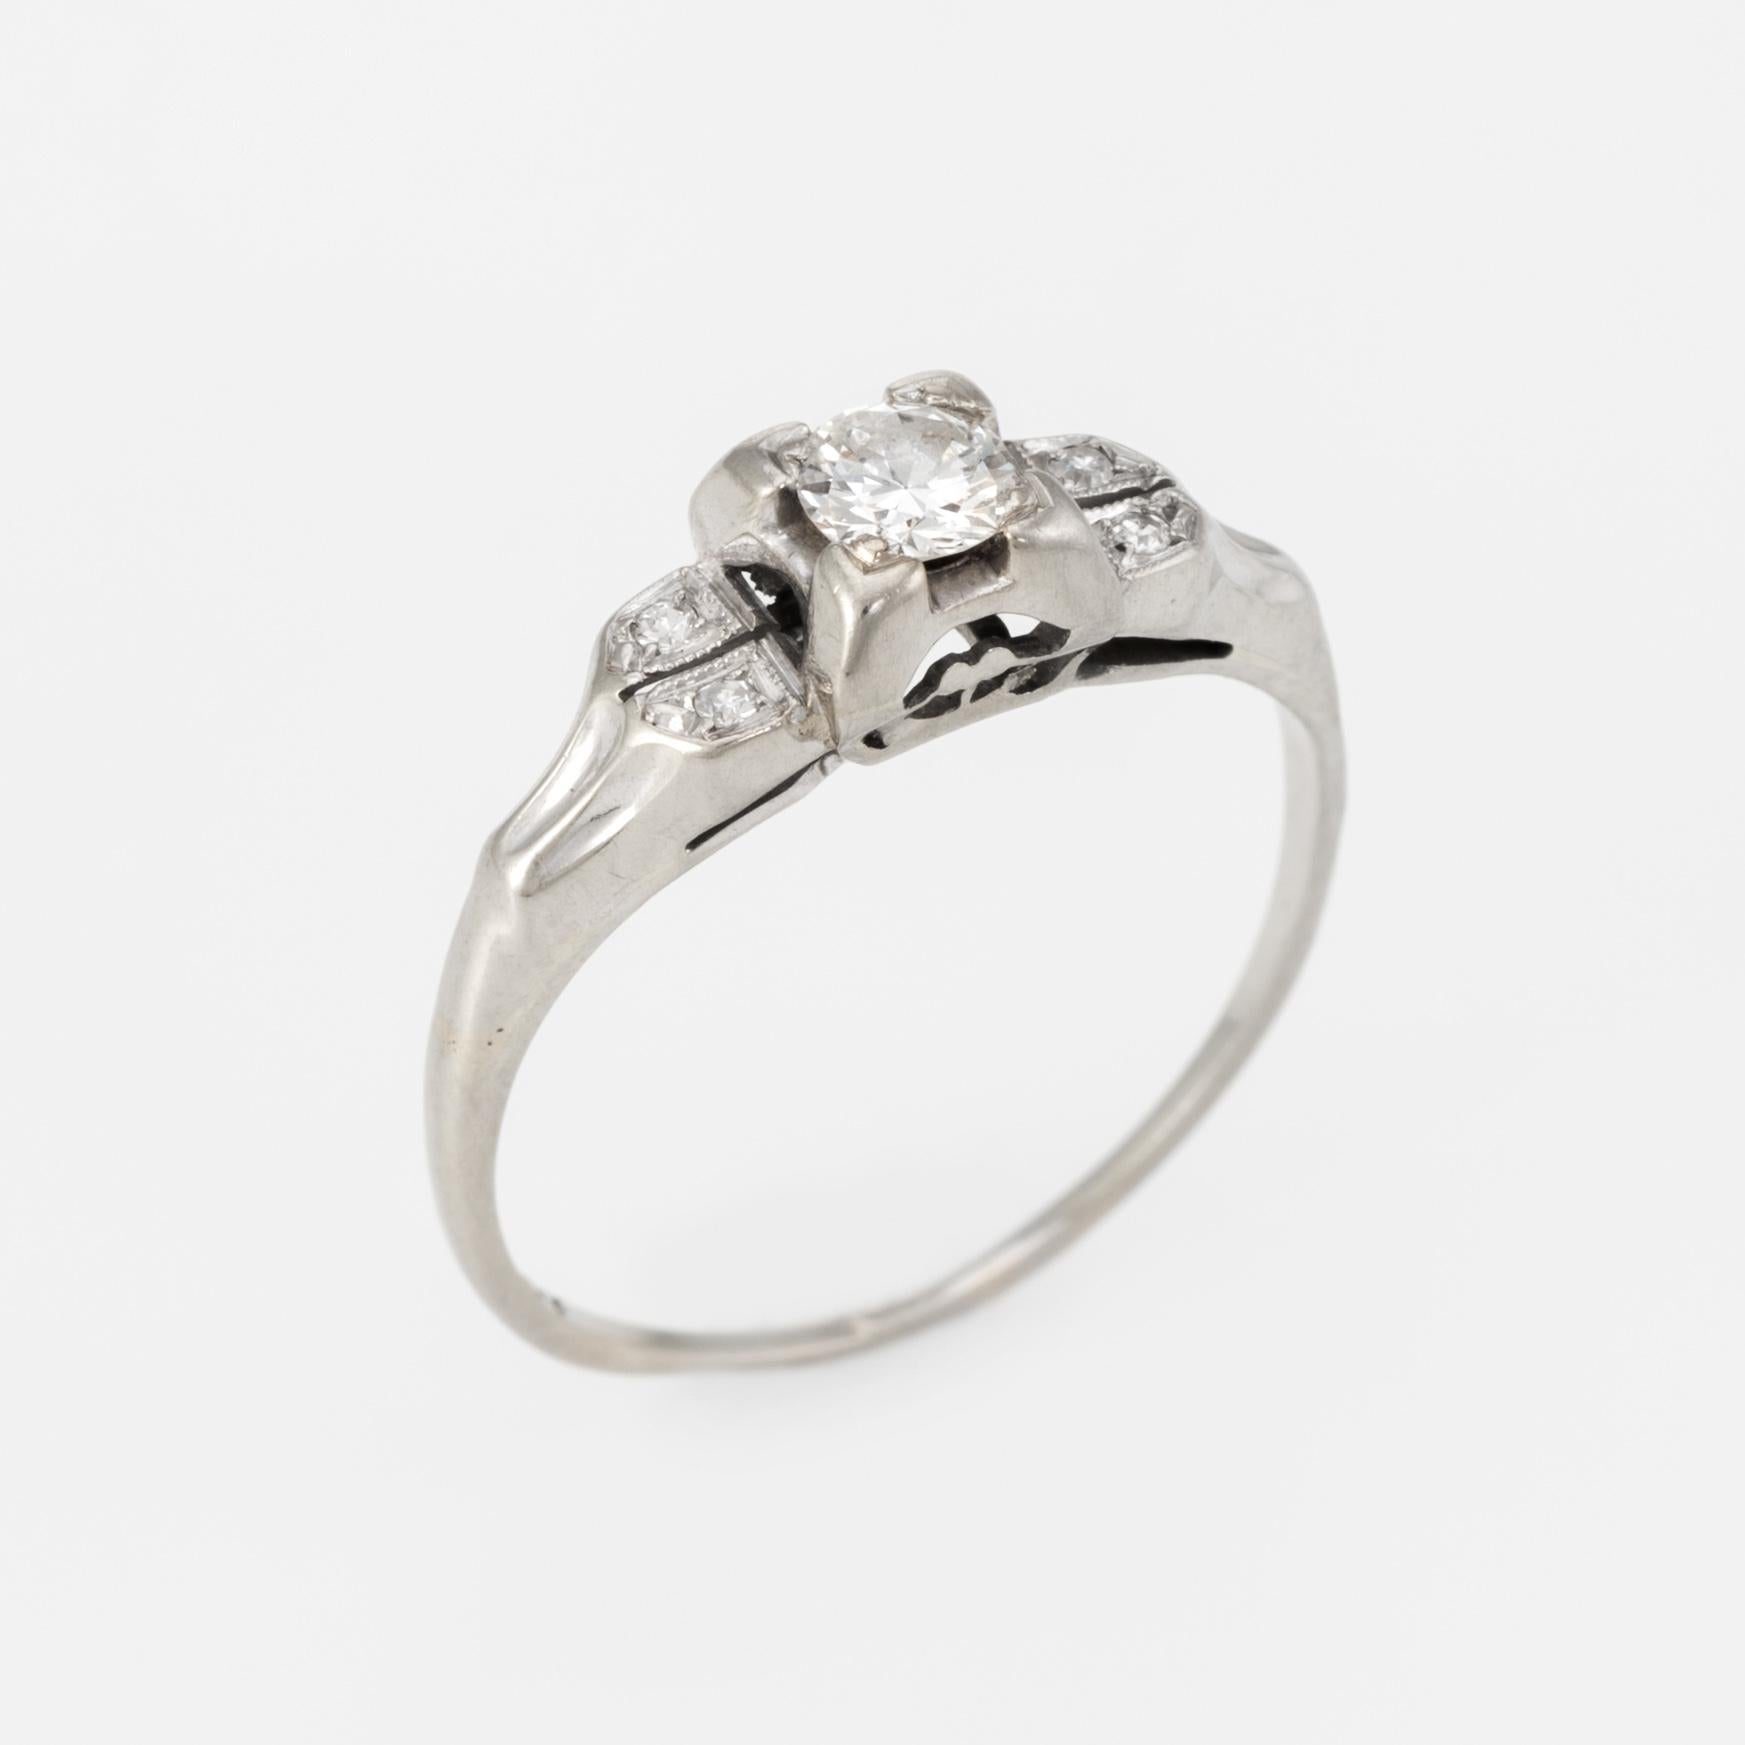 Elegant Art Deco era ring (circa 1920s to 1930s), crafted in 14 karat white gold. 

Centrally mounted Old European cut diamond is estimated at 0.22 carats, accented with four approx. 0.01 carat single cut diamonds. The total diamond weight is